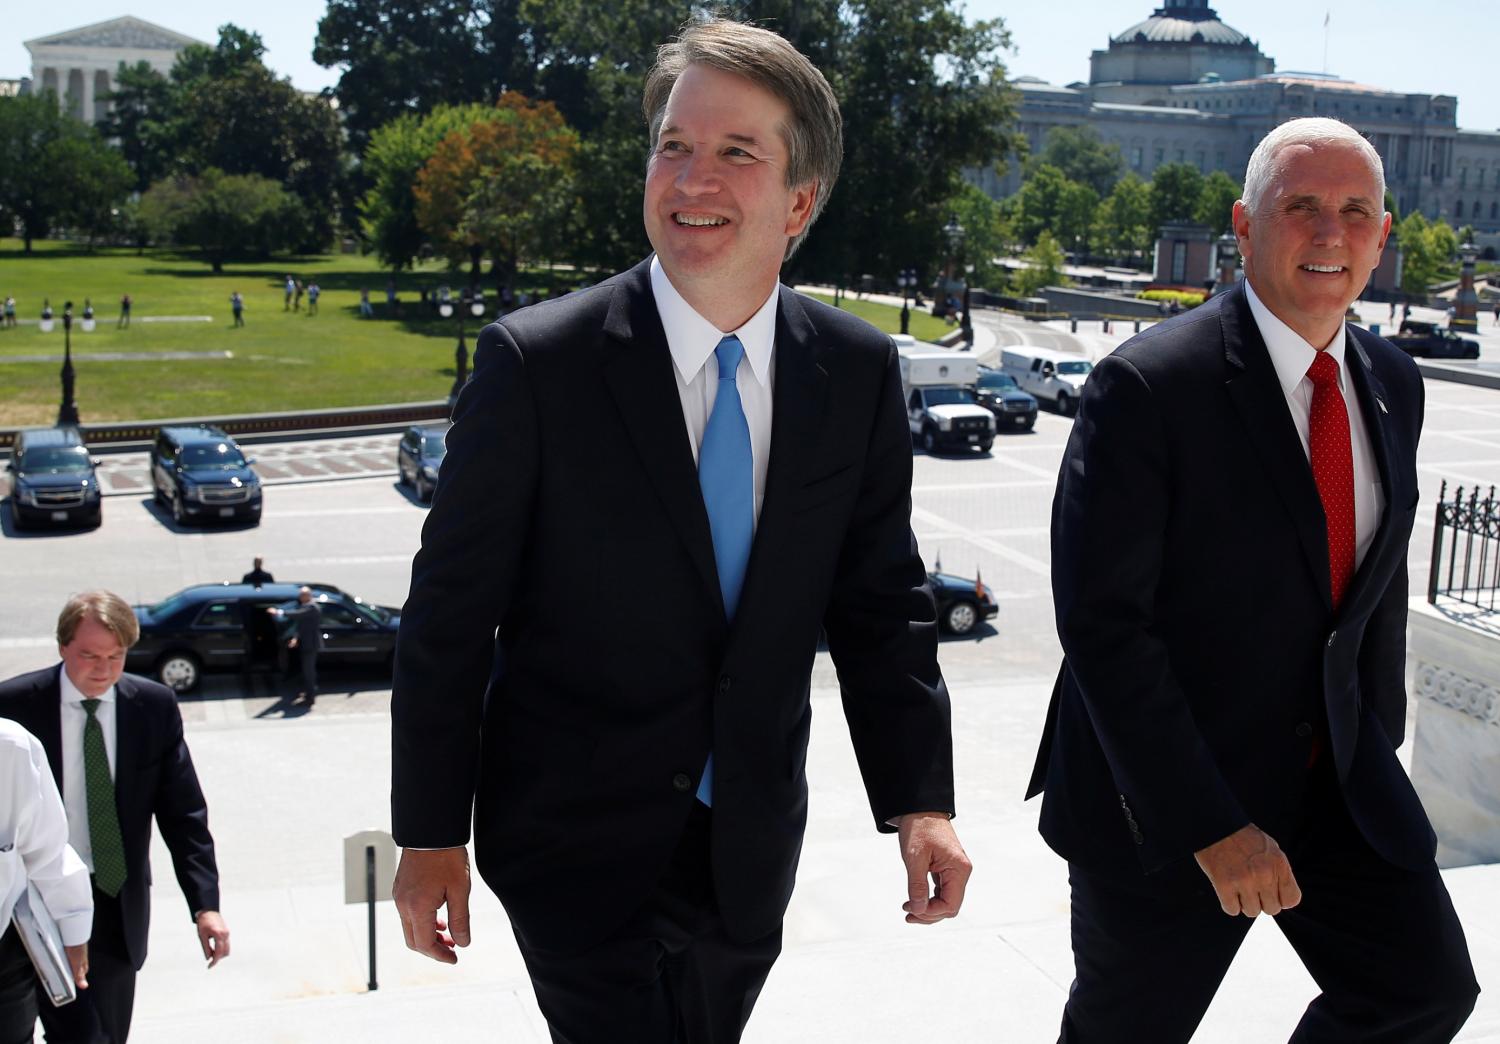 With the U.S. Supreme Court building in the background, Supreme Court nominee judge Brett Kavanaugh arrives with U.S. Vice President Mike Pence prior to meeting with Senate Majority Leader Mitch McConnell on Capitol Hill in Washington, U.S., July 10, 2018. REUTERS/Joshua Roberts - RC1165F1B5C0